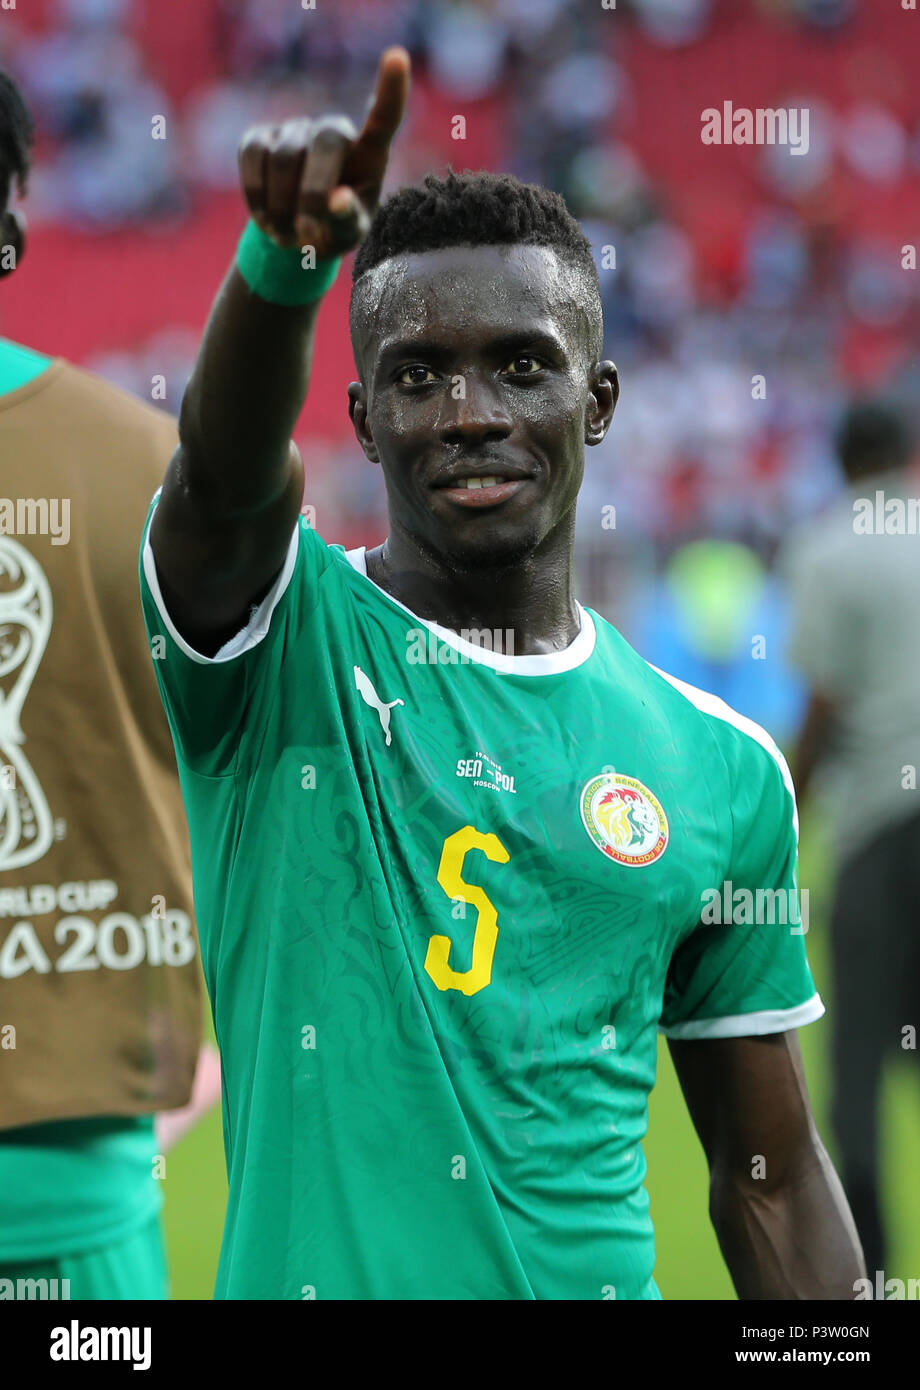 Idrissa Gueye SENEGAL POLAND V SENEGAL, 2018 FIFA WORLD CUP RUSSIA 19 June 2018 GBC8363 Poland v Senegal 2018 FIFA World Cup Russia Spartak Stadium Moscow STRICTLY EDITORIAL USE ONLY. If The Player/Players Depicted In This Image Is/Are Playing For An English Club Or The England National Team. Then This Image May Only Be Used For Editorial Purposes. No Commercial Use. The Following Usages Are Also Restricted EVEN IF IN AN EDITORIAL CONTEXT: Use in conjuction with, or part of, any unauthorized audio, video, data, fixture lists, club/league logos, Betting, Games or any 'live' se Stock Photo